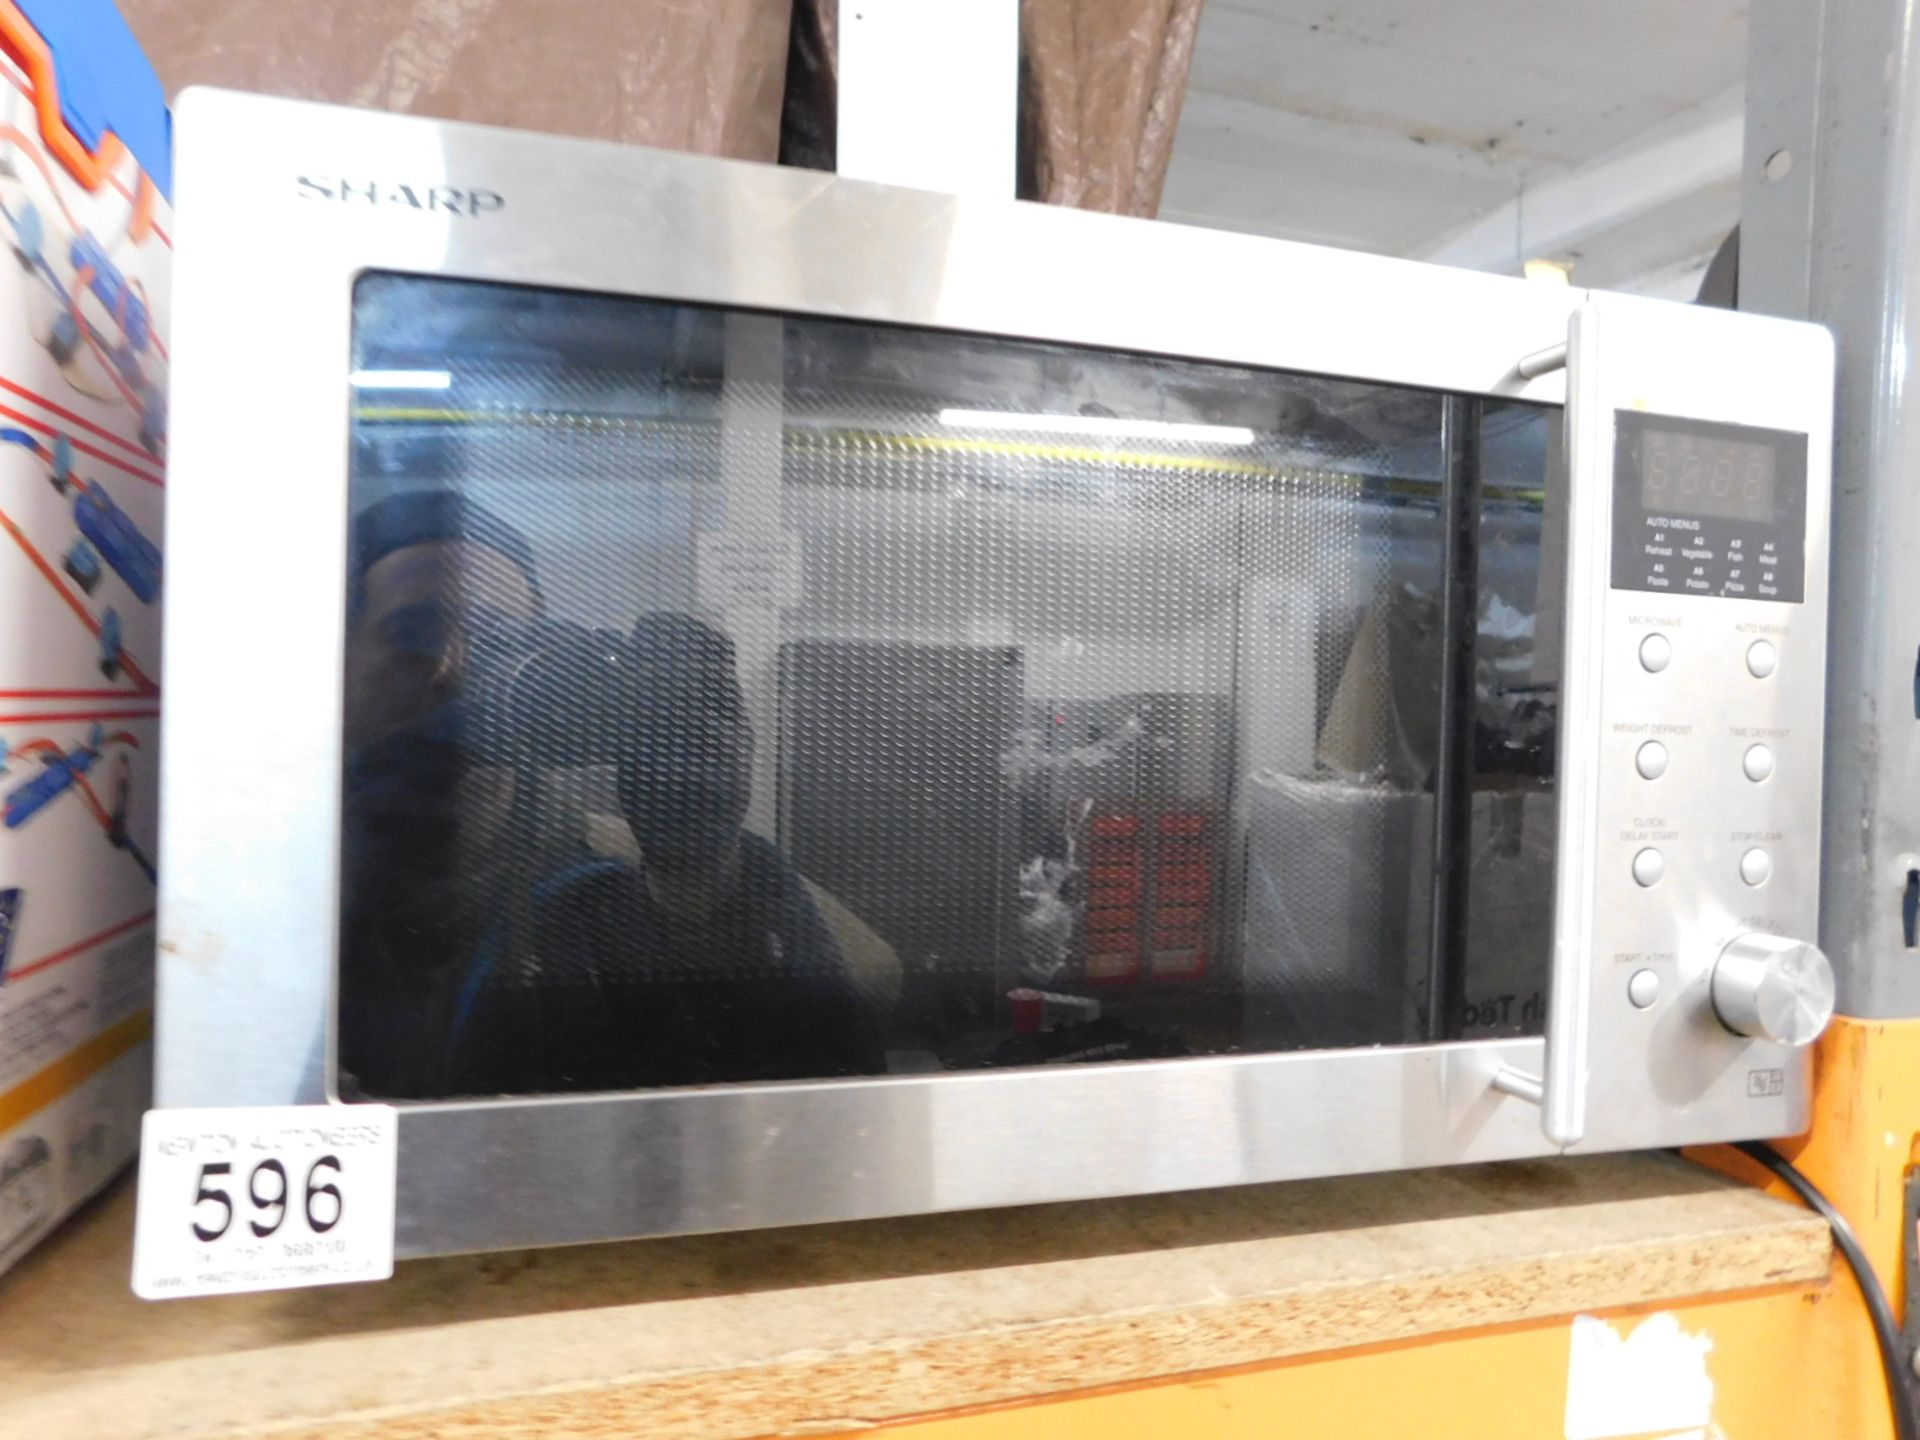 1 SHARP SOLO 23 LITRE STAINLESS STEEL MICROWAVE OVEN RRP Â£179.99